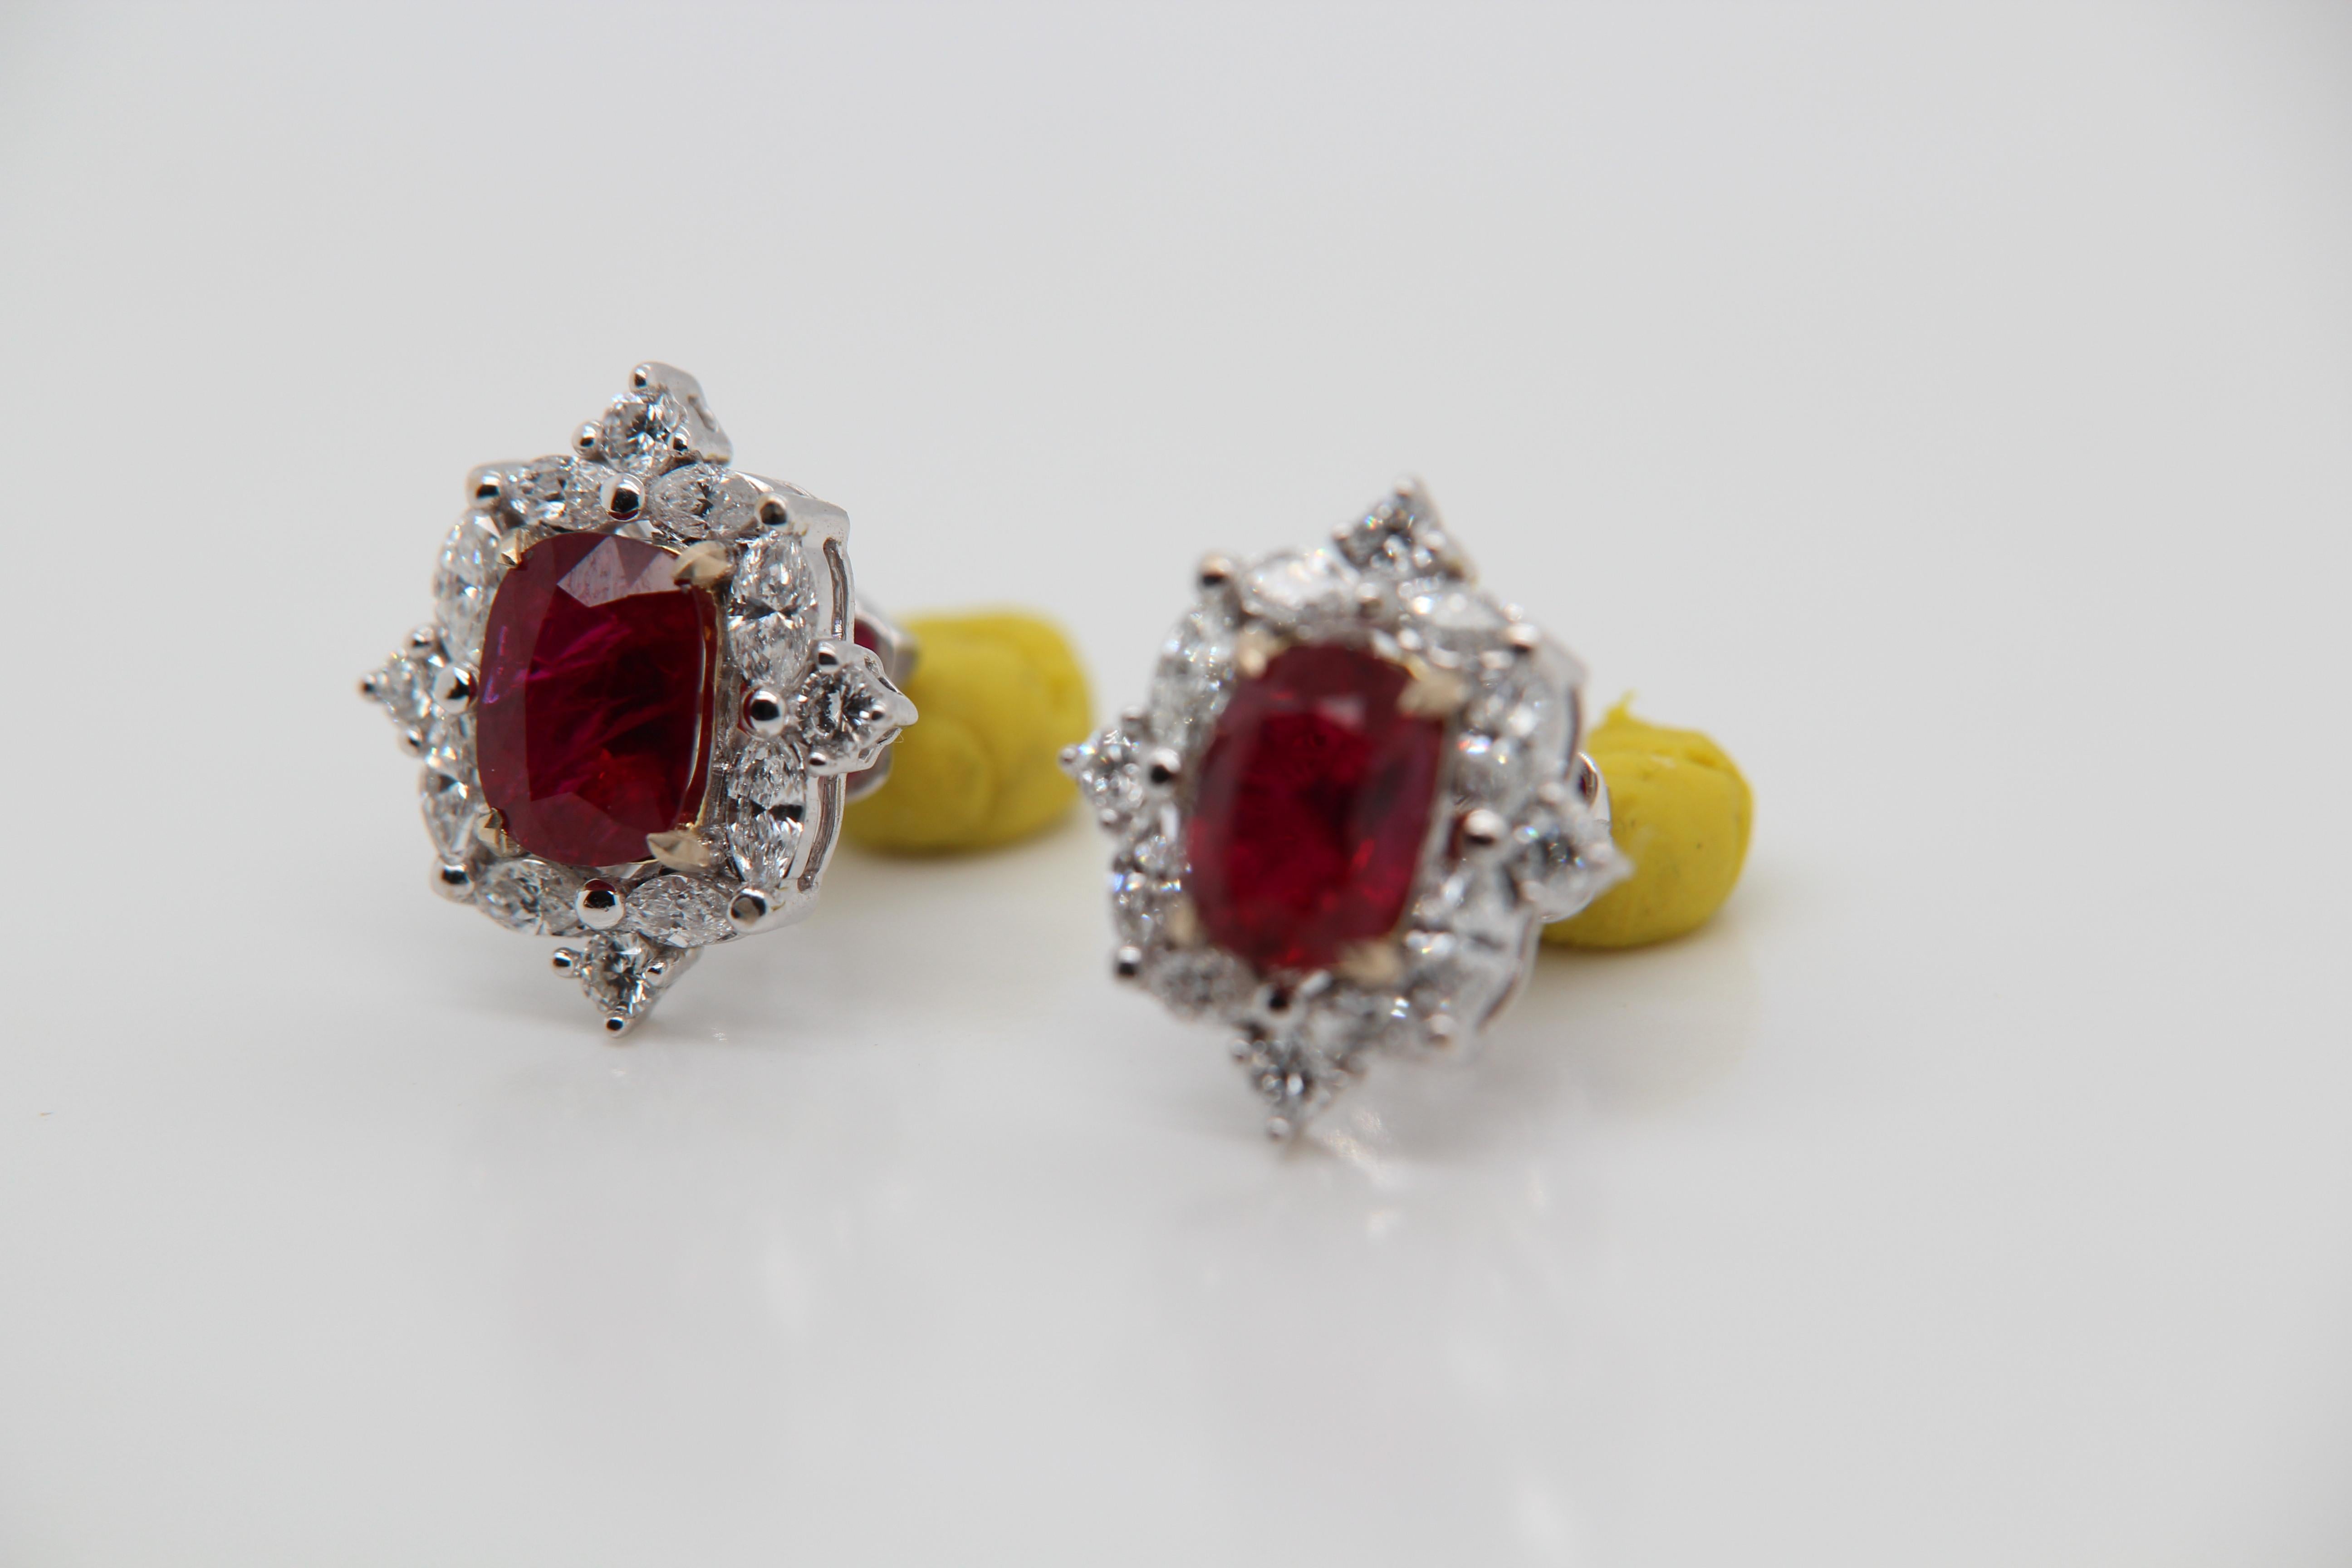 A new 2.74 carat Burmese ruby earring mounted with diamonds in 18 Karat gold. The ruby weighs 1.33 and 1.41 carats and are certified by Gem Research Swisslab (GRS) as natural, no heat, and 'Vivid Red Pigeon's Blood'. The total diamond weight is 1.14